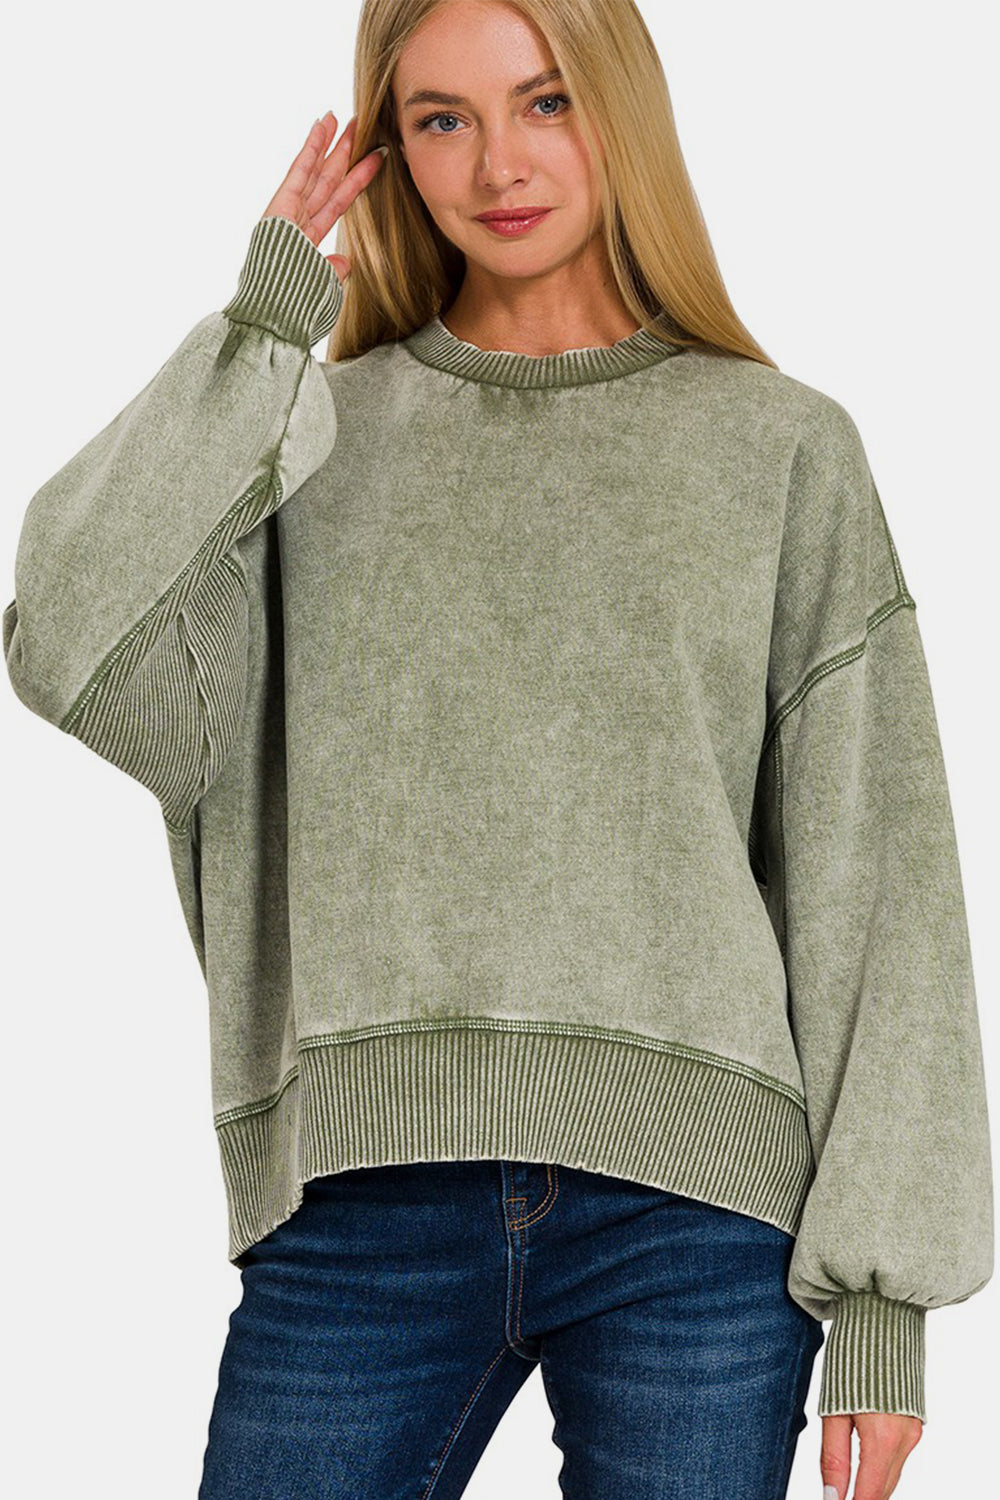 Women's Olive Green Oversized Pullover Sweater